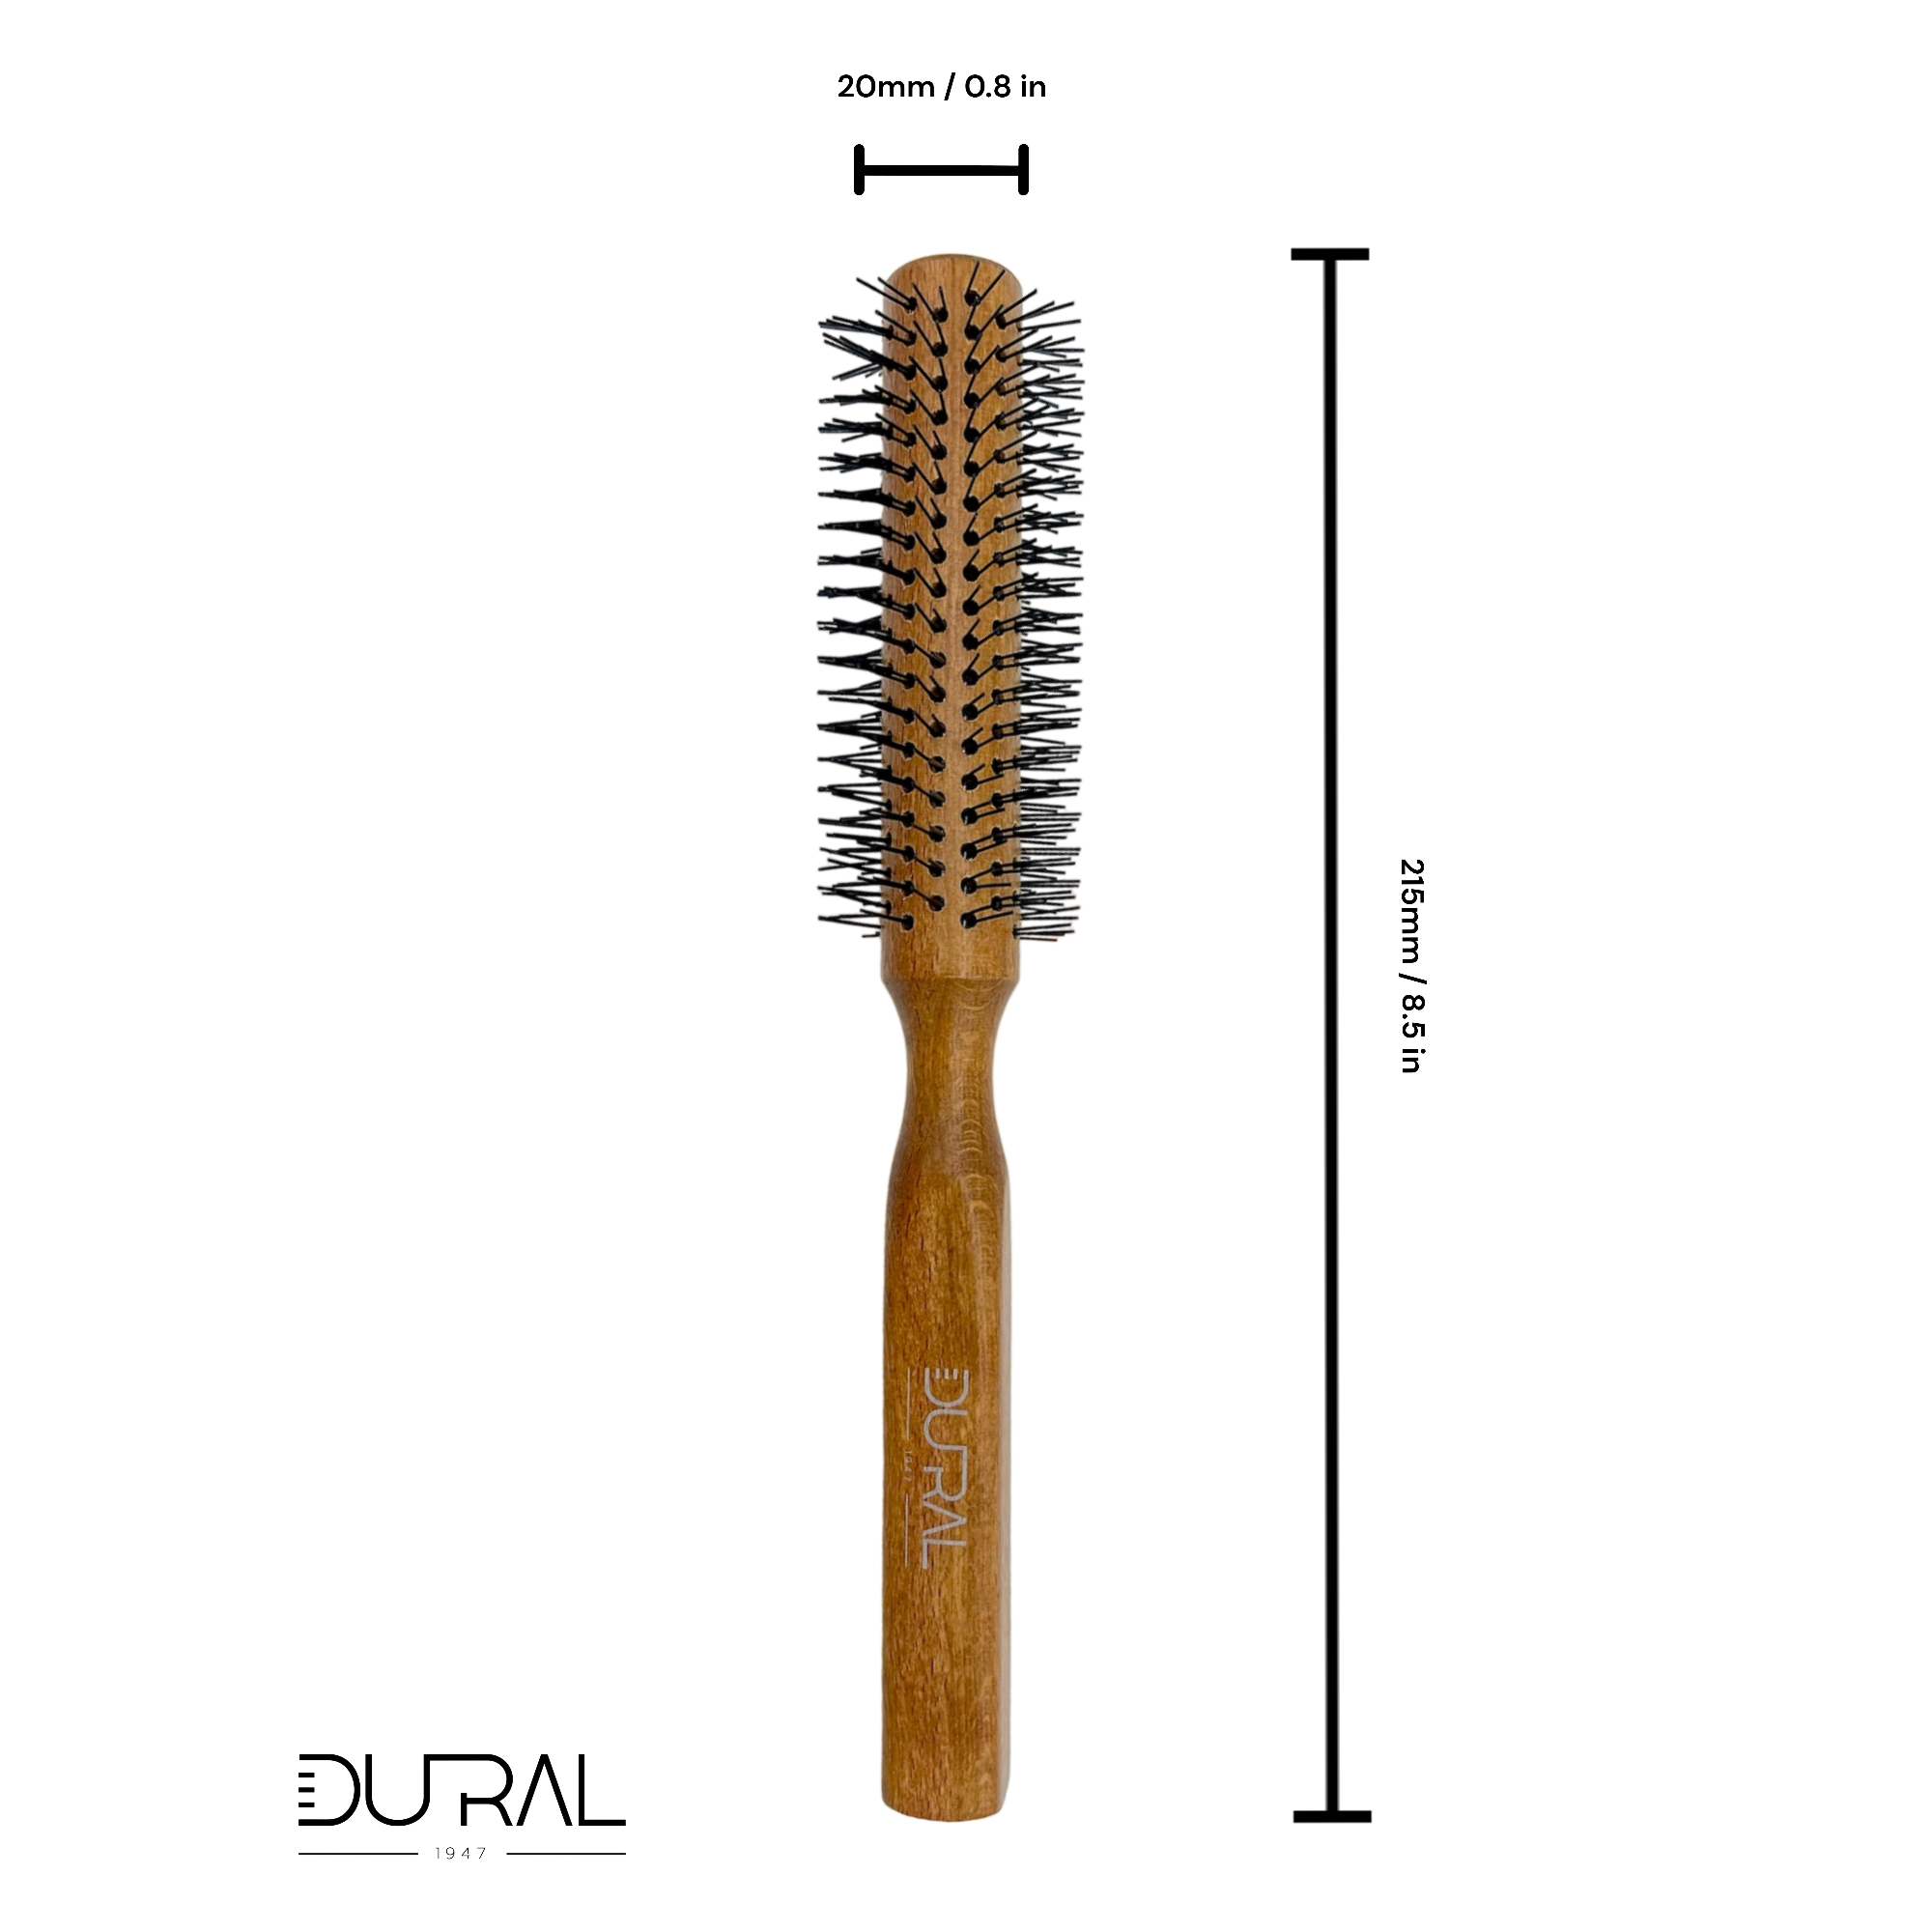 Dural Beech wood round-styler hair brush with nylon pins - 14 rows